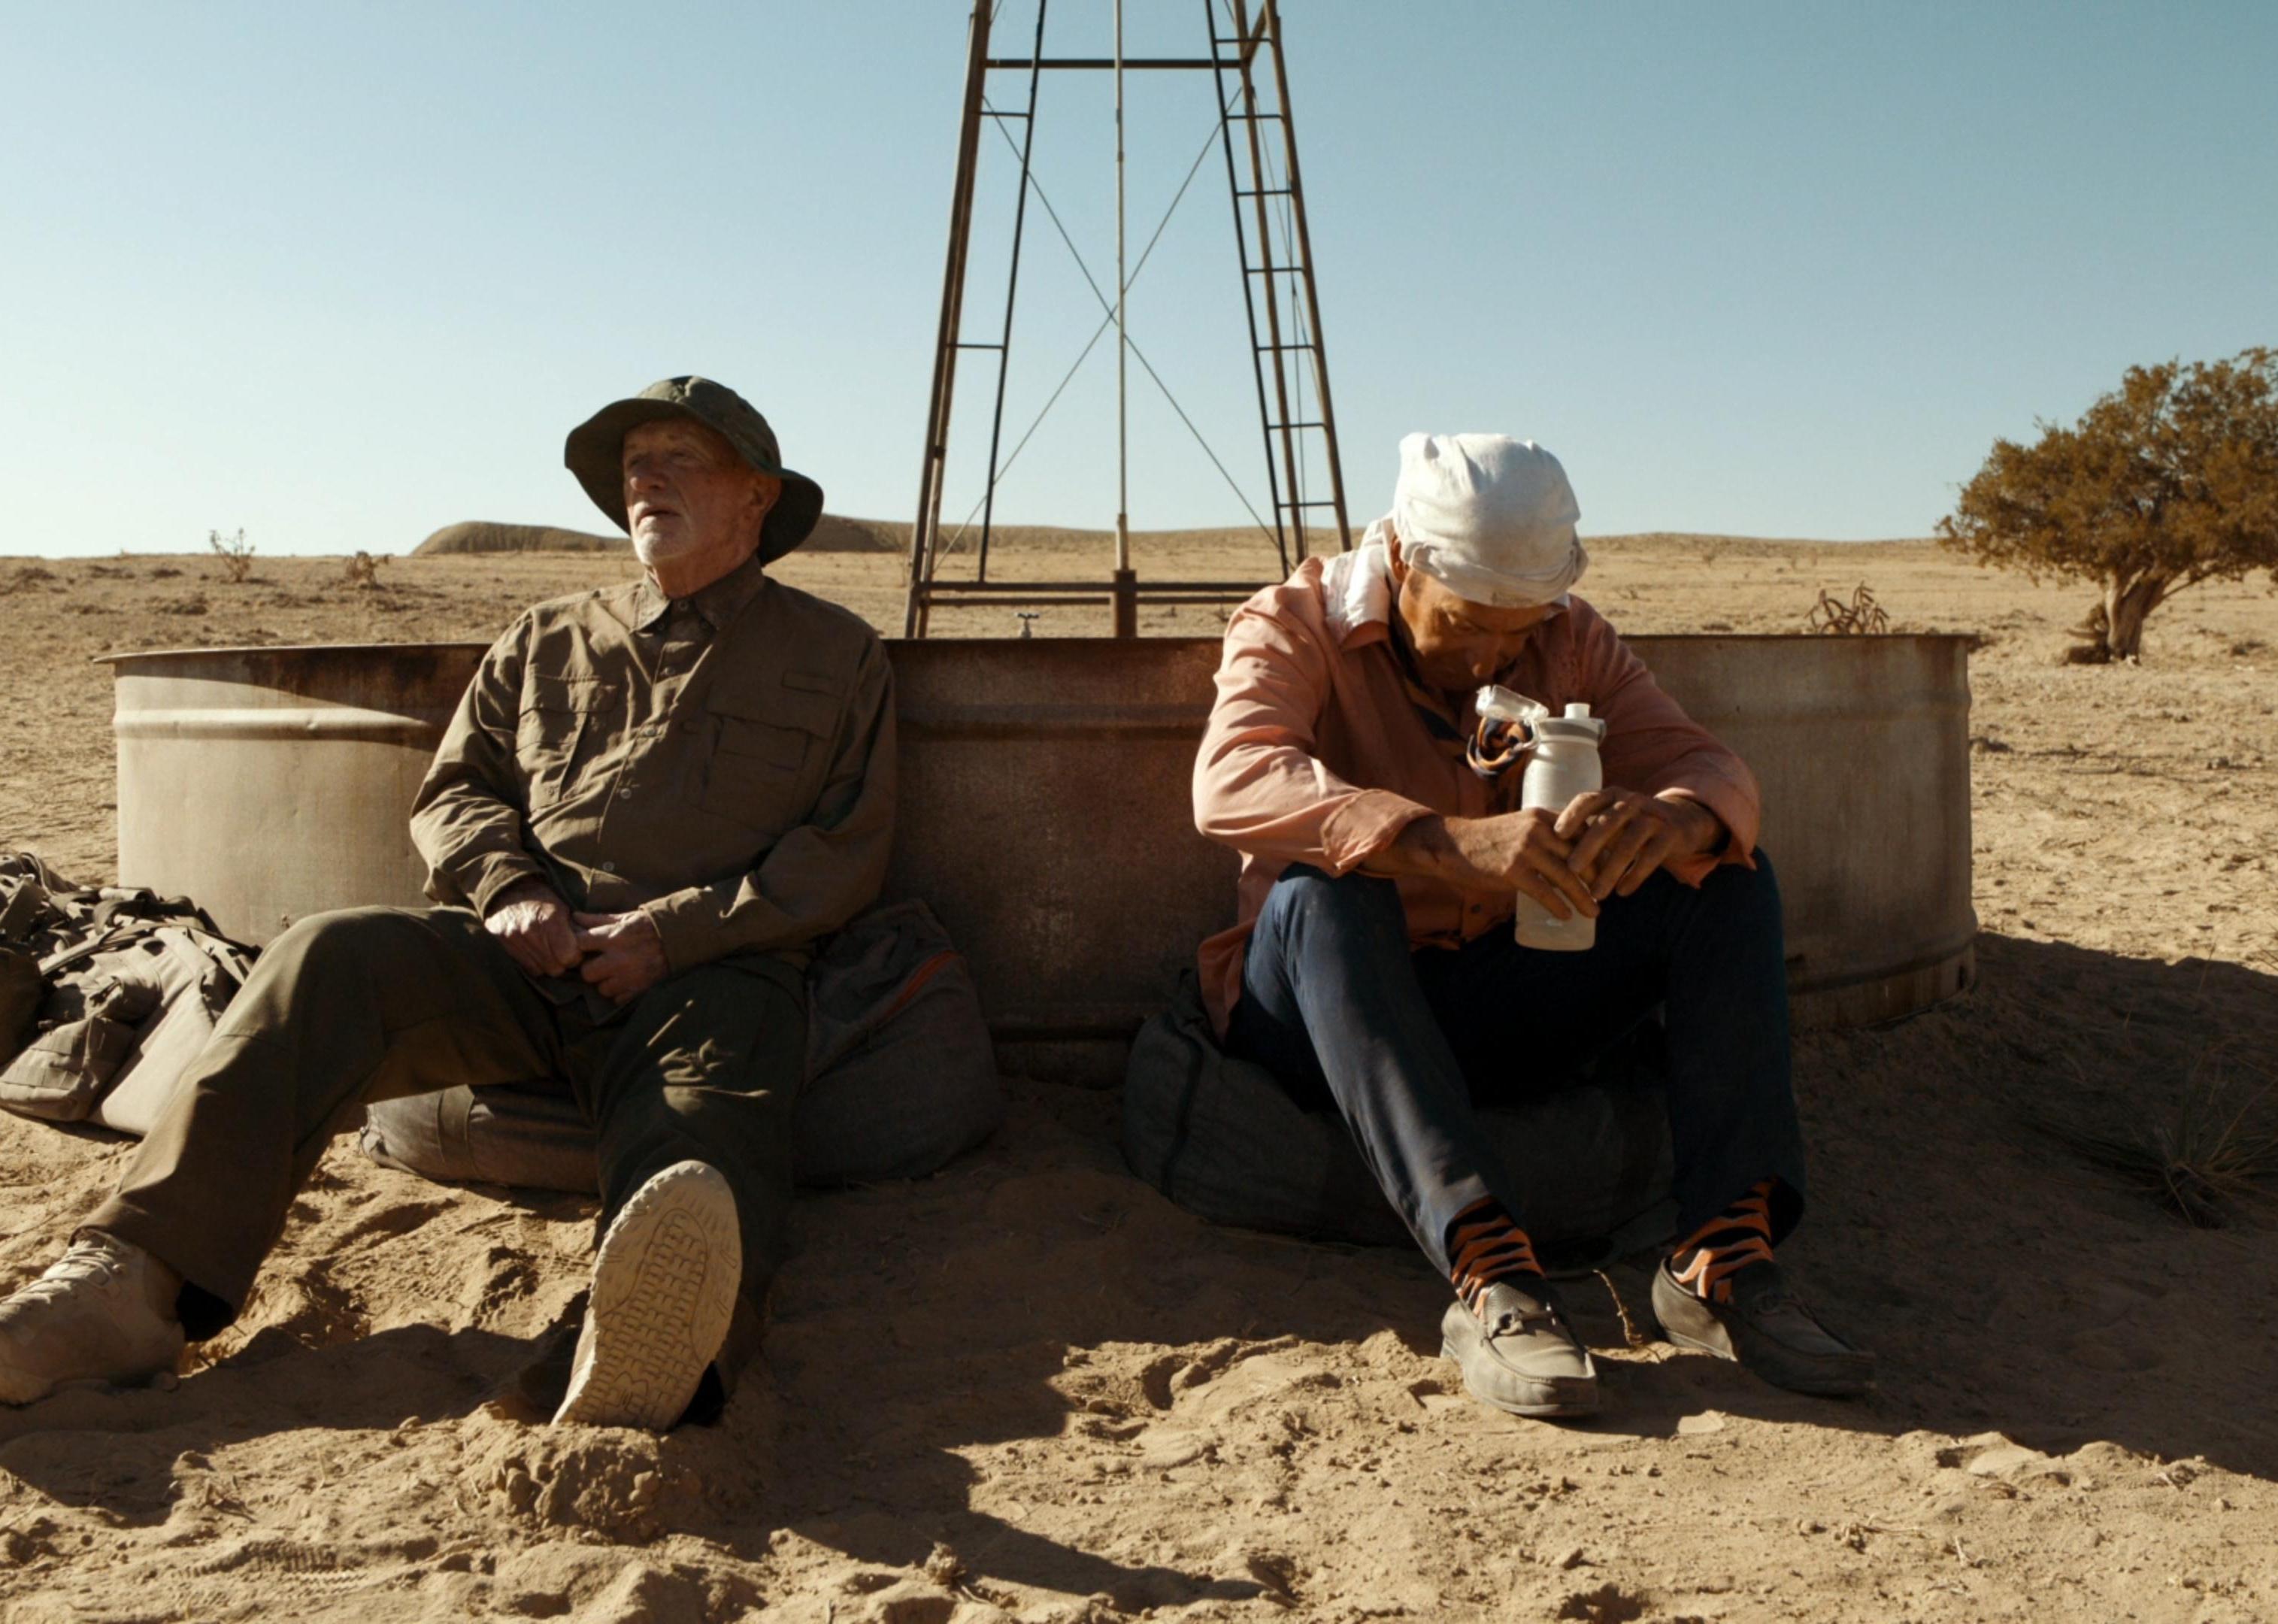 Jonathan Banks and Bob Odenkirk in the blazing sun in front of a water trough and windmill.